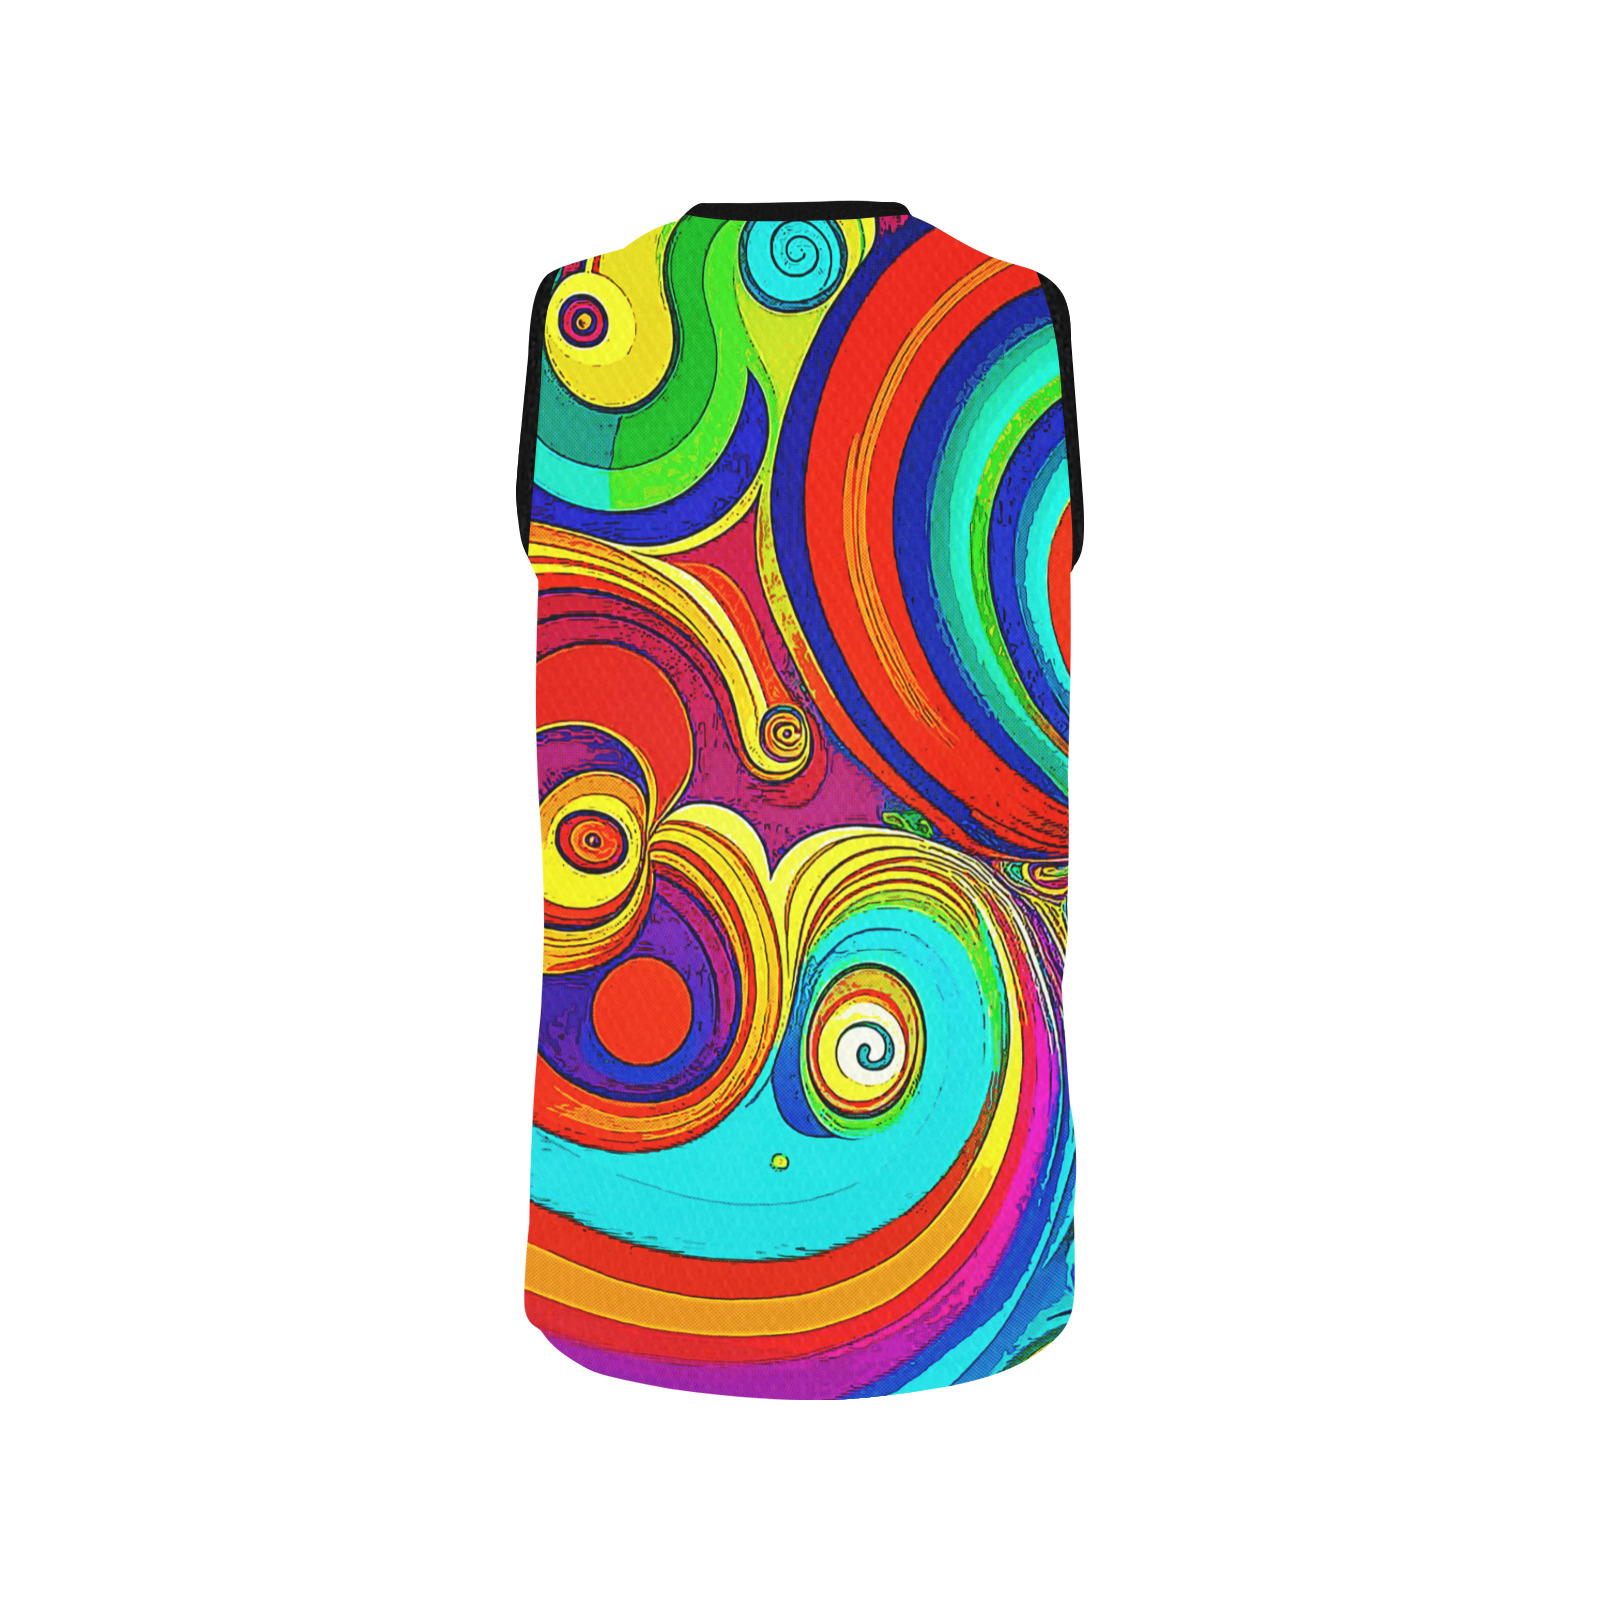 Colorful Groovy Rainbow Swirls All Over Print Basketball Jersey